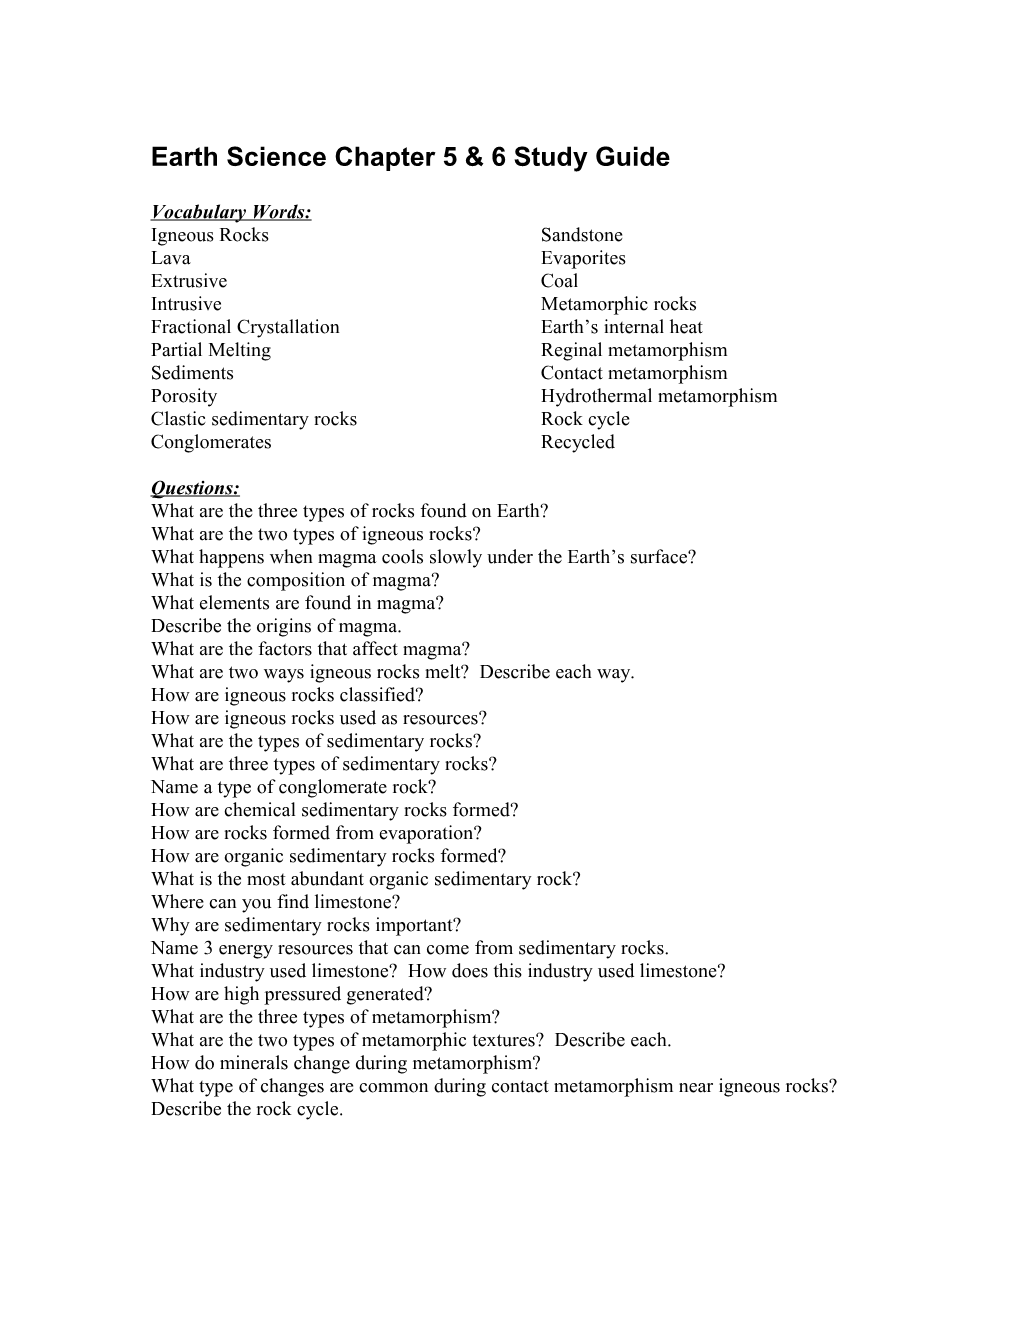 Earth Science Chapter 5 & 6 Study Guide